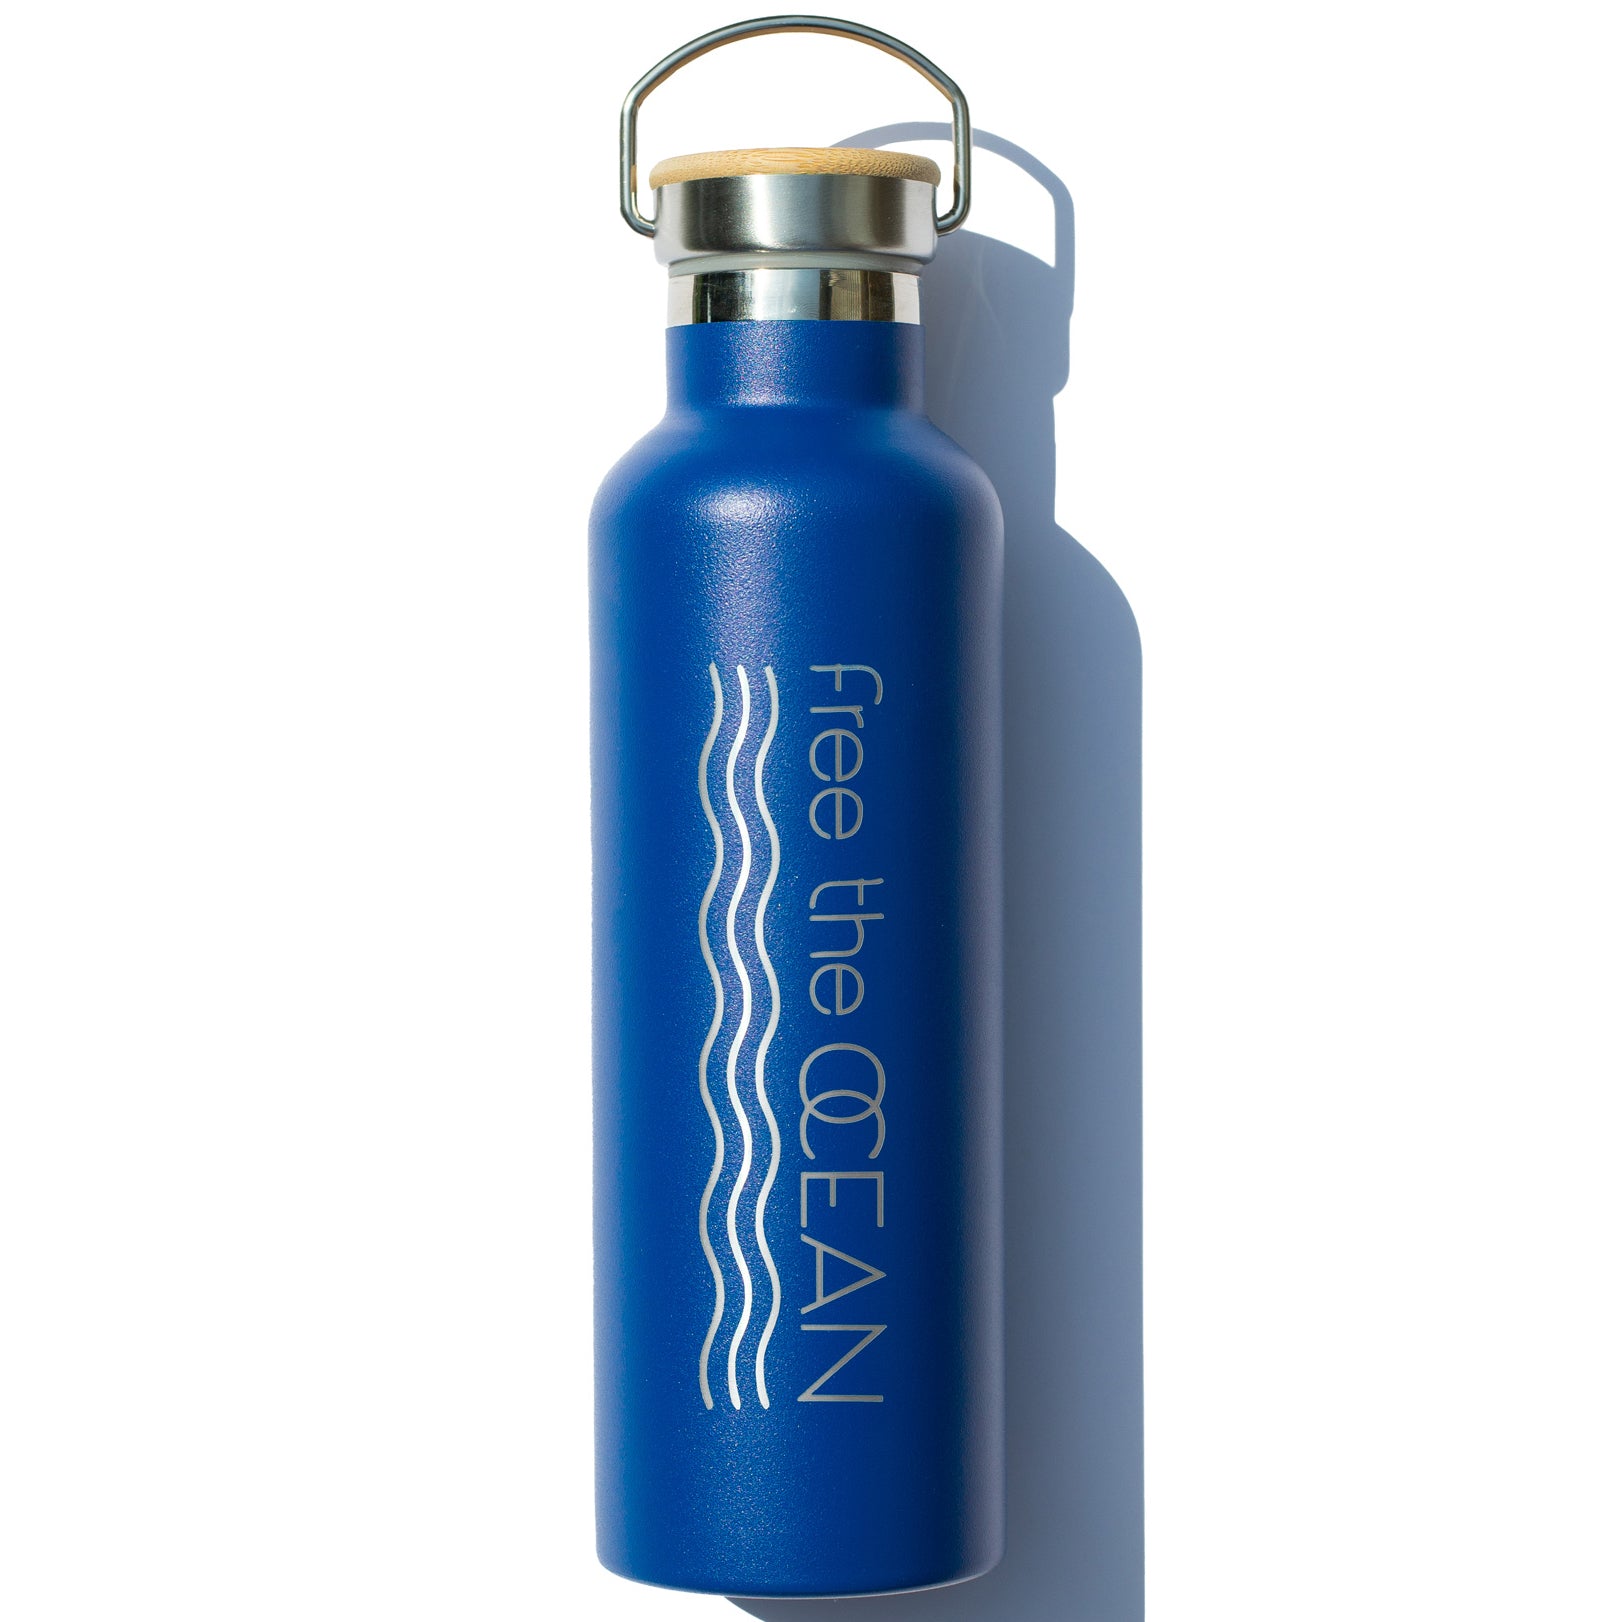 blue paws Dog Water Bottle with Clip